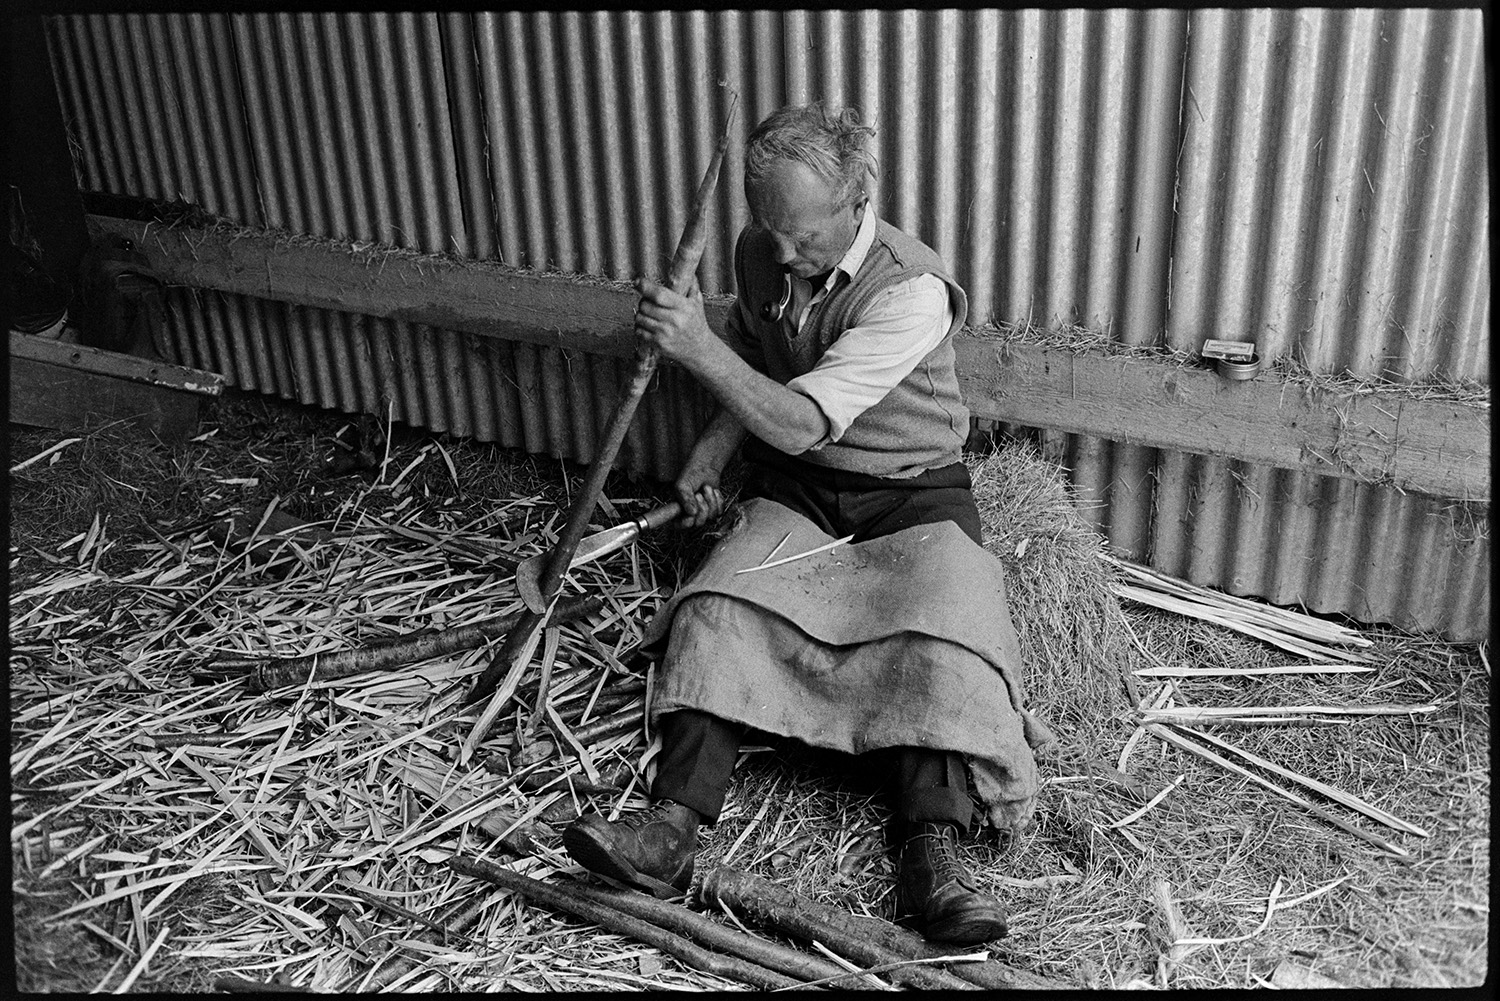 Thatcher cutting spars. 
[Bill Hammond sat on a hay bale by a corrugated iron barn cutting spars of wood for thatching at Newhouse, Ashreigney. He is using a billhook and has a hessian sack covering his knees.]